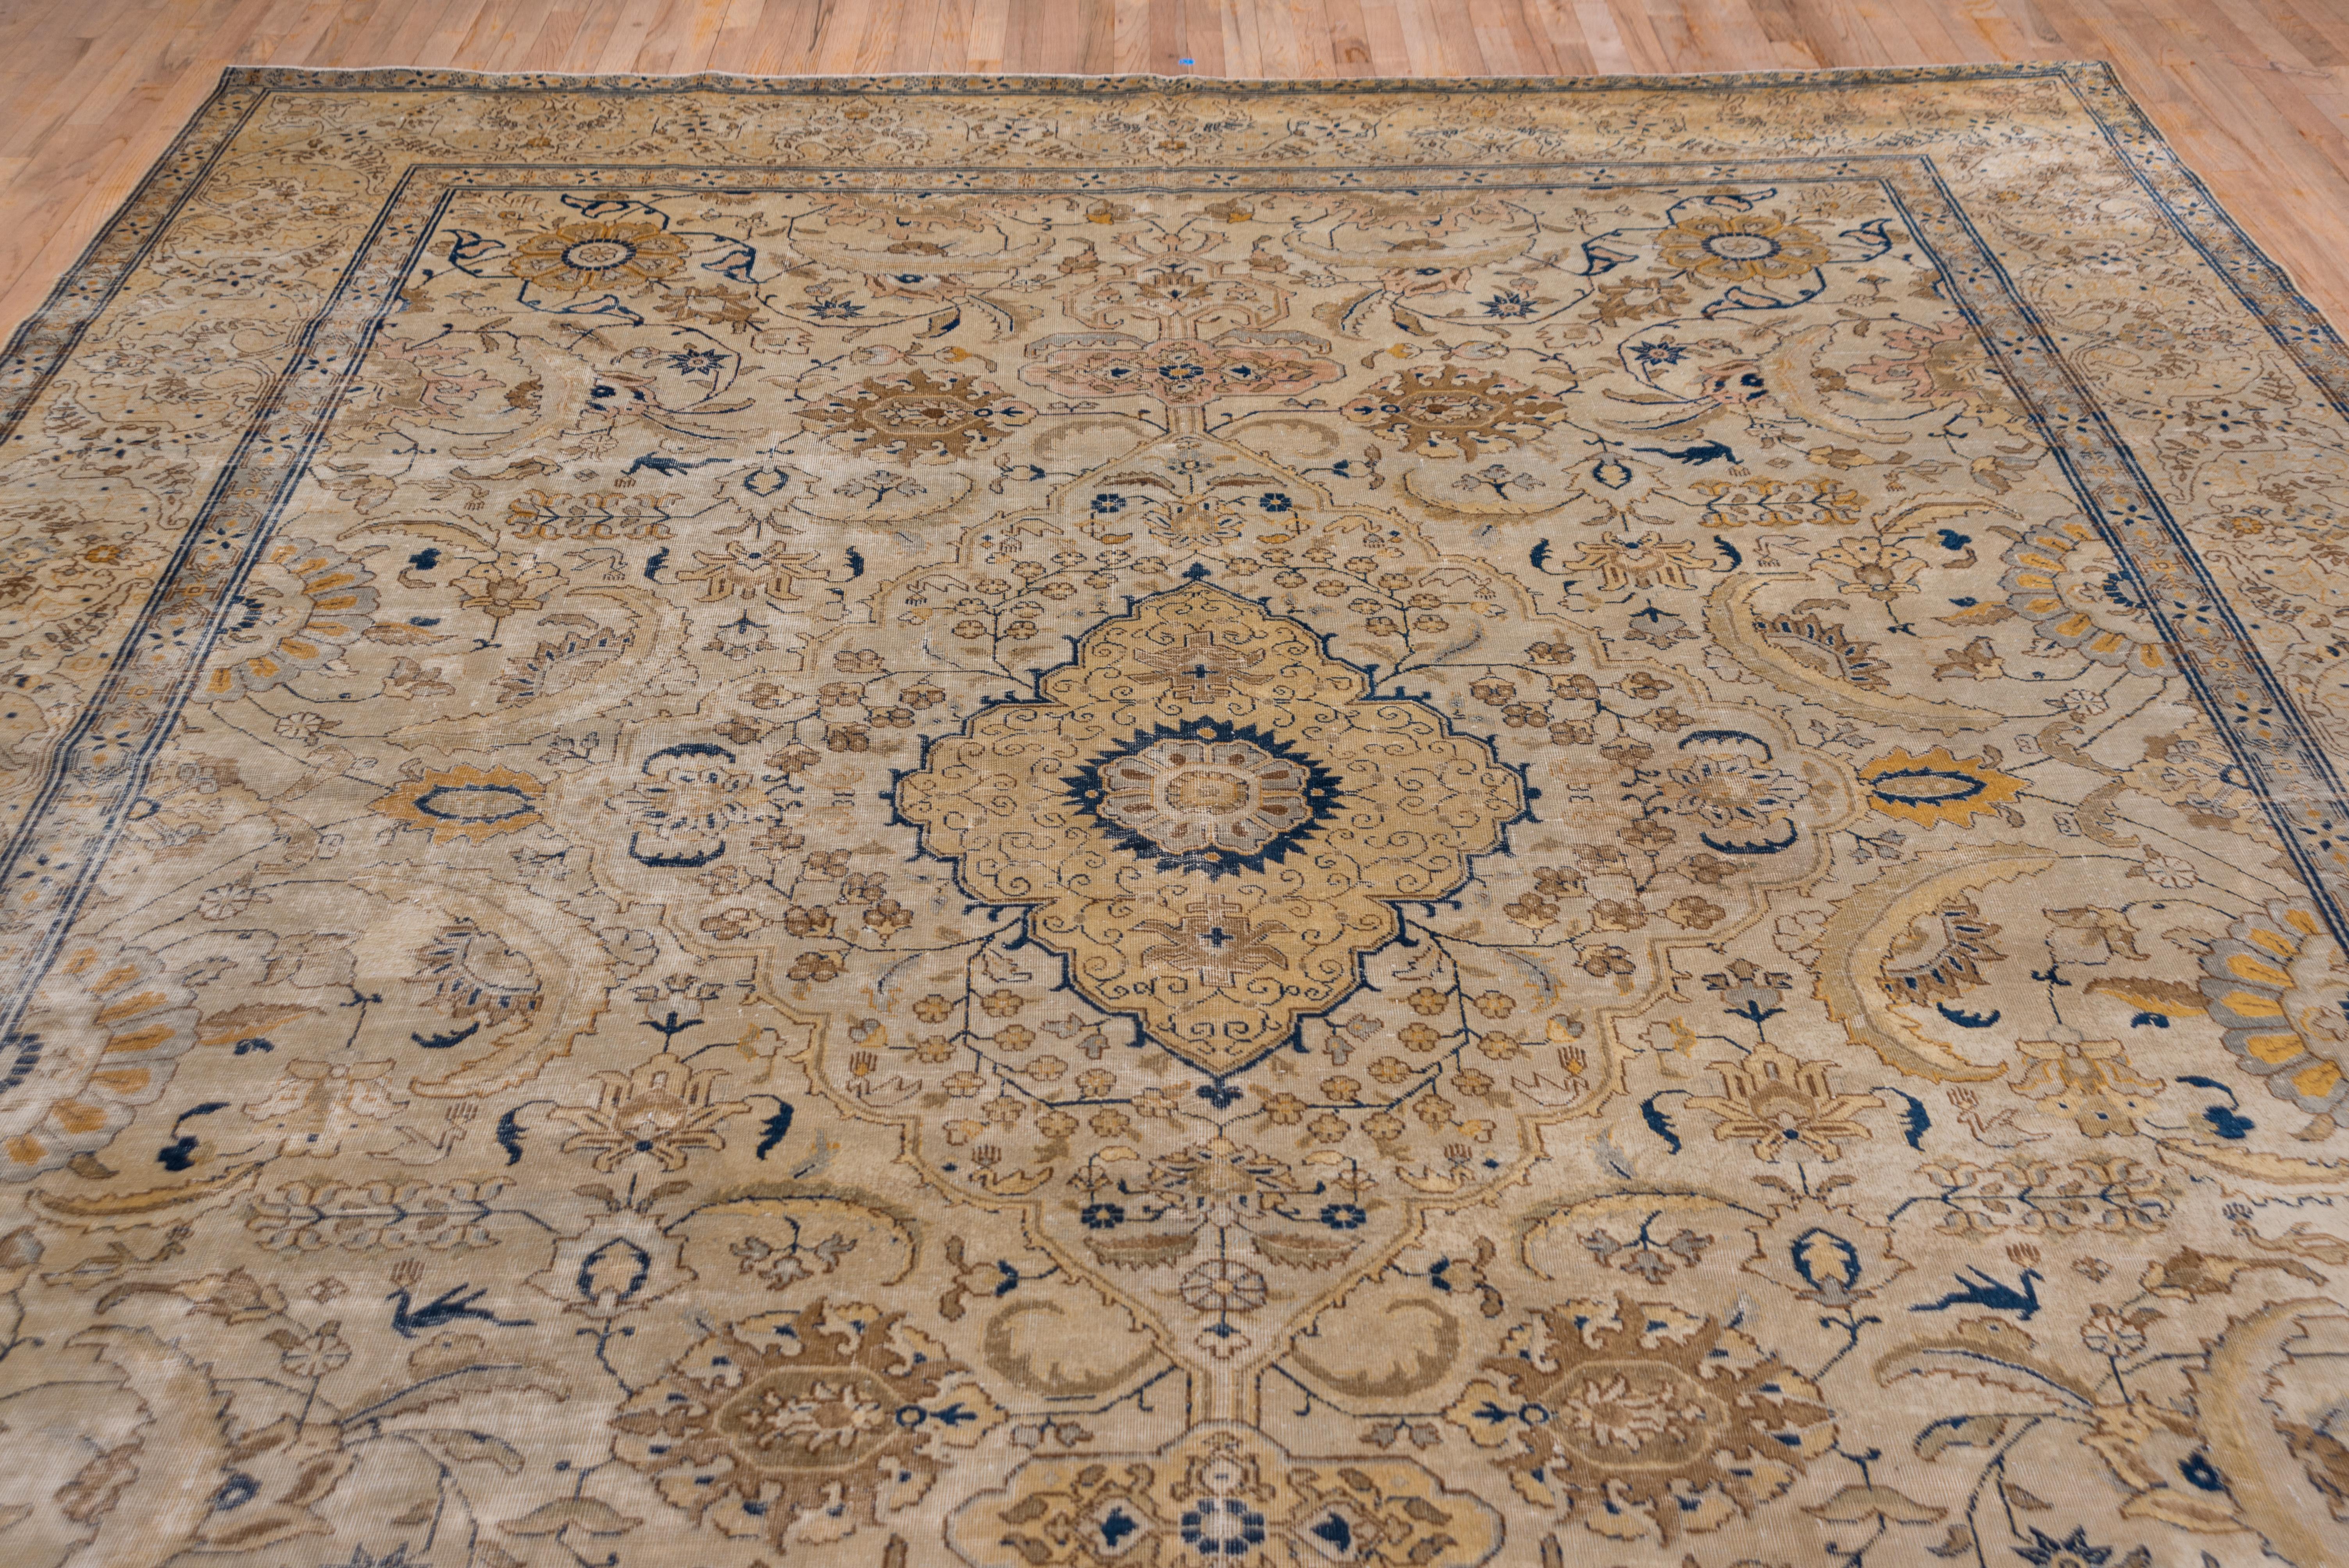 The sand ground of this well-woven NW Persian city carpet shows a small scalloped straw medallion set within a pattern of large sickle leaves, petal rosettes, ragged palmettes and flowering sprays and vines. The sand/straw border features a strong